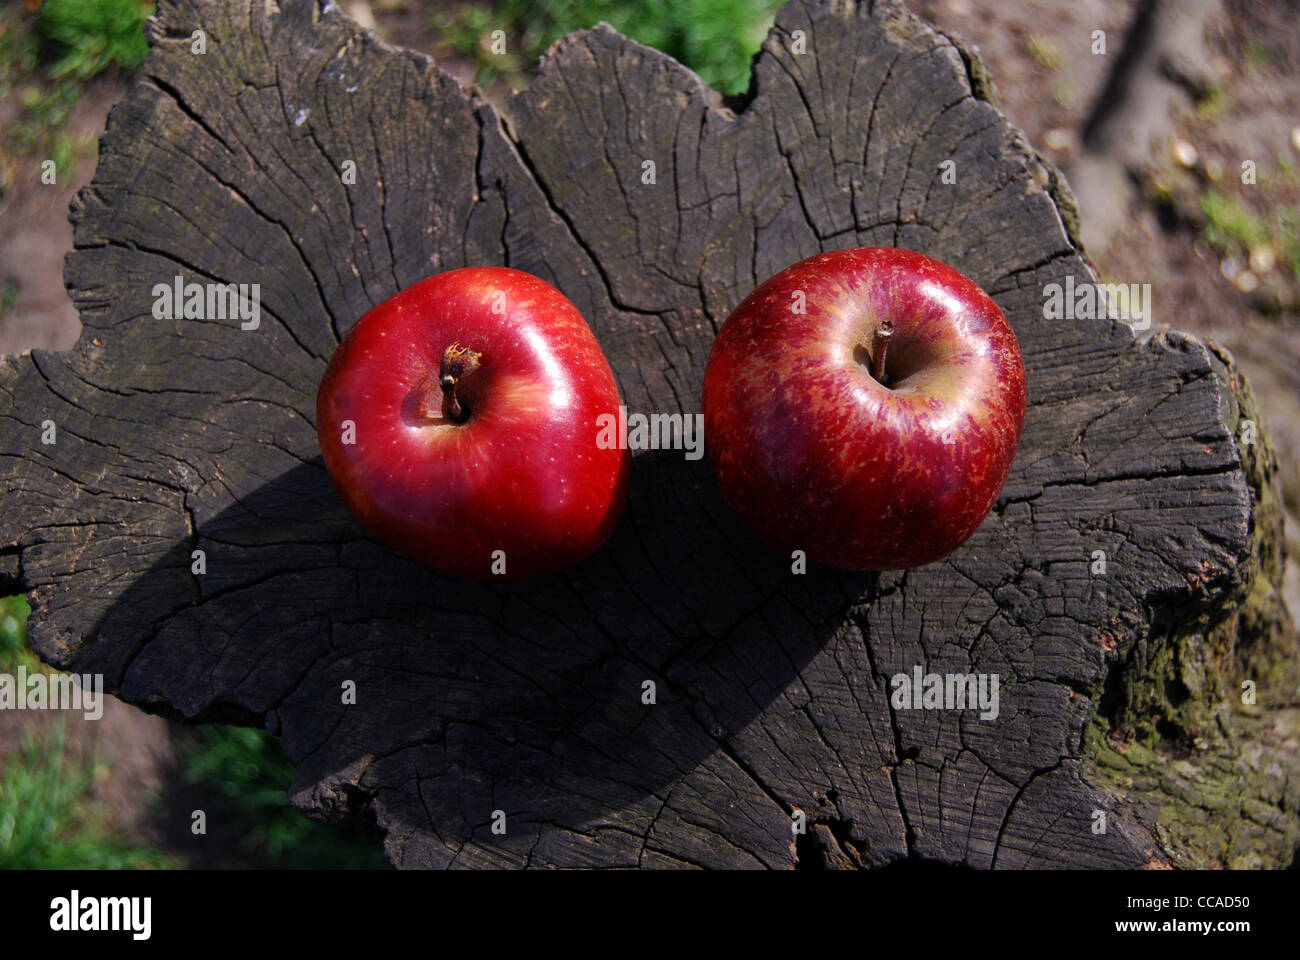 The Traveling Apples - Apples sitting on a tree trunk Stock Photo